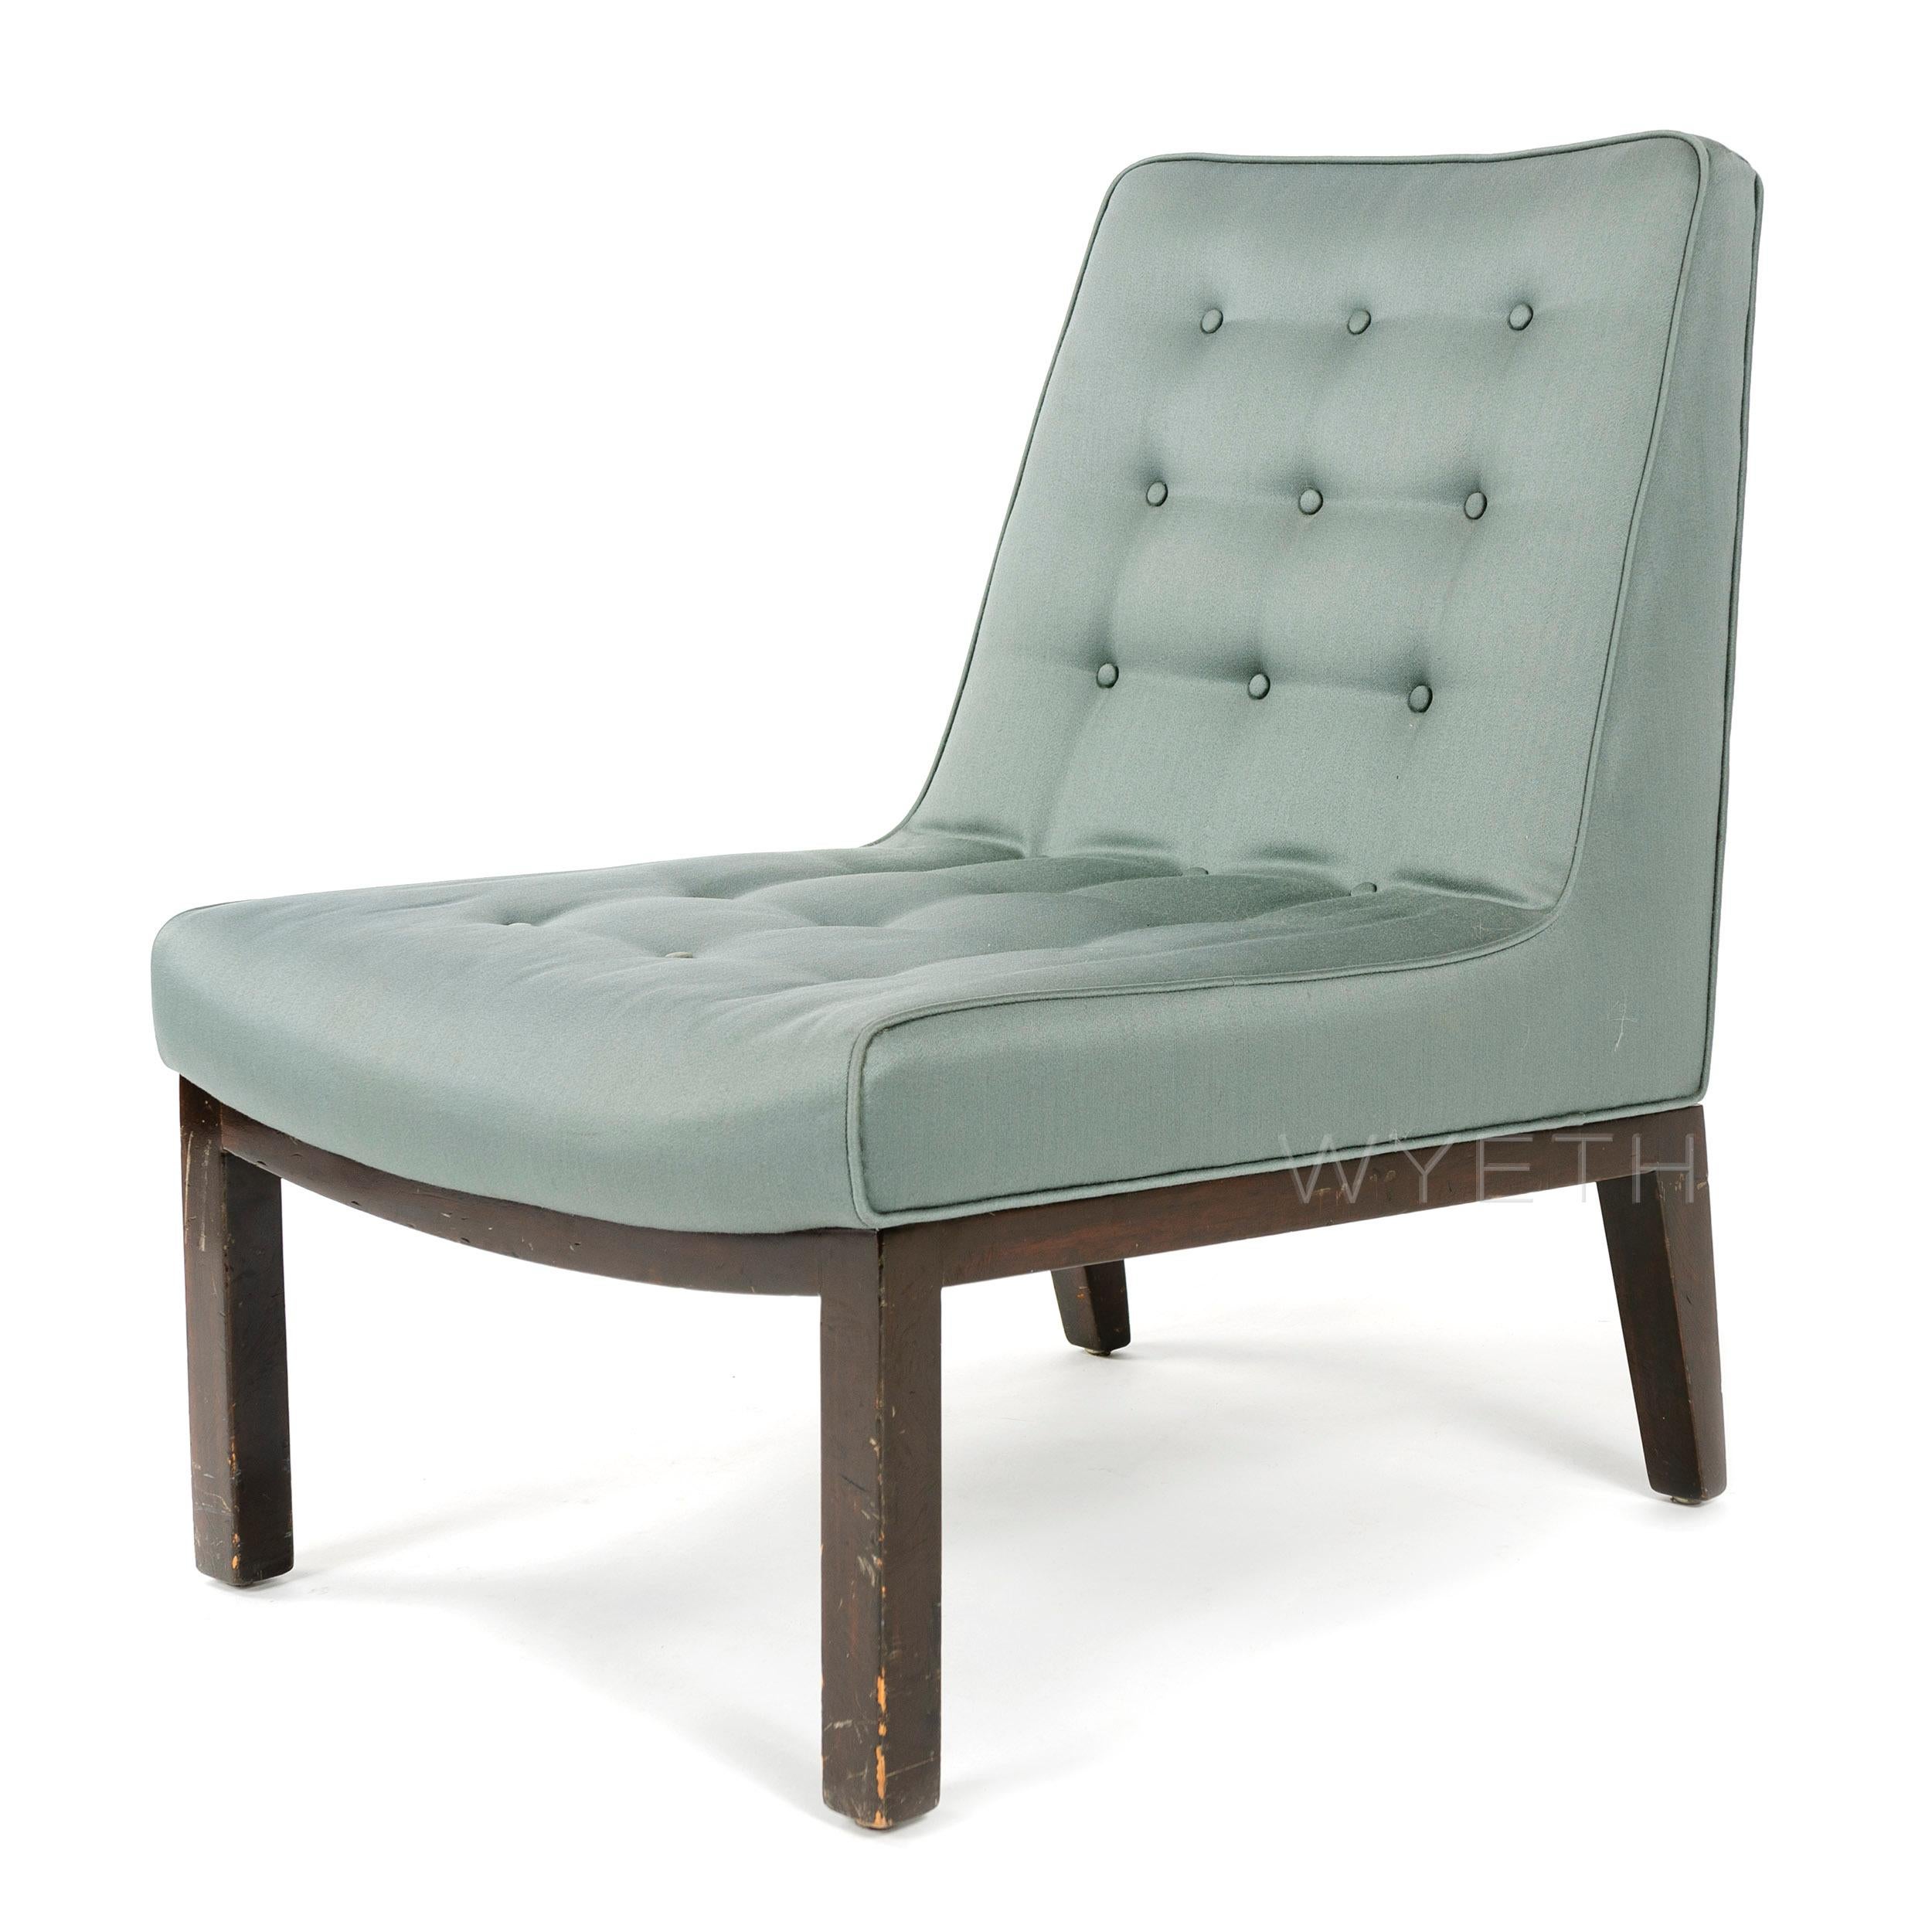 An armless button tufted lounge chair of generous proportion having exposed walnut base. Model: 5000.